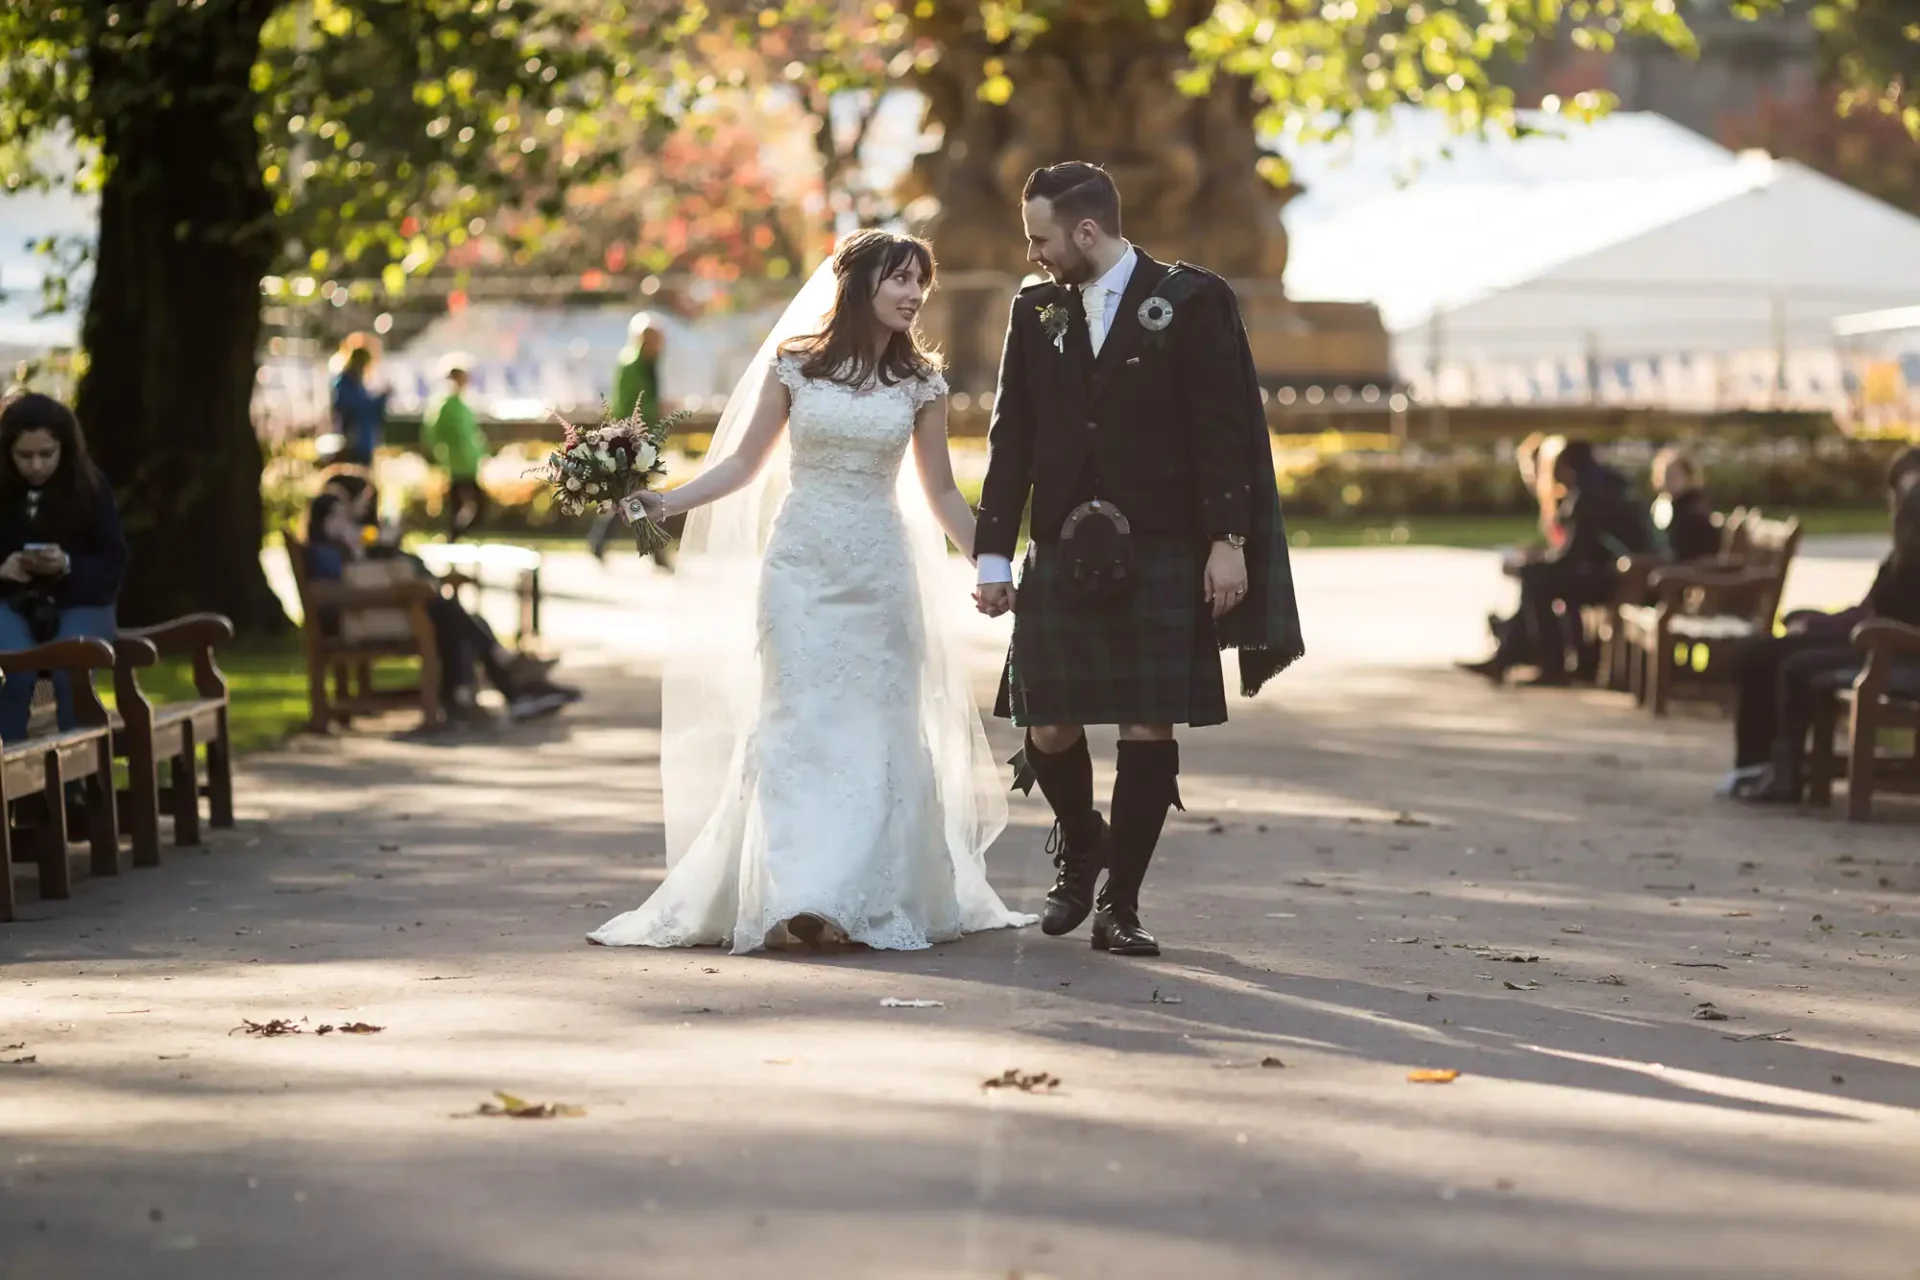 A bride in a white dress and a groom in a kilt walk hand in hand through a sunlit park with scattered leaves, smiling joyously.